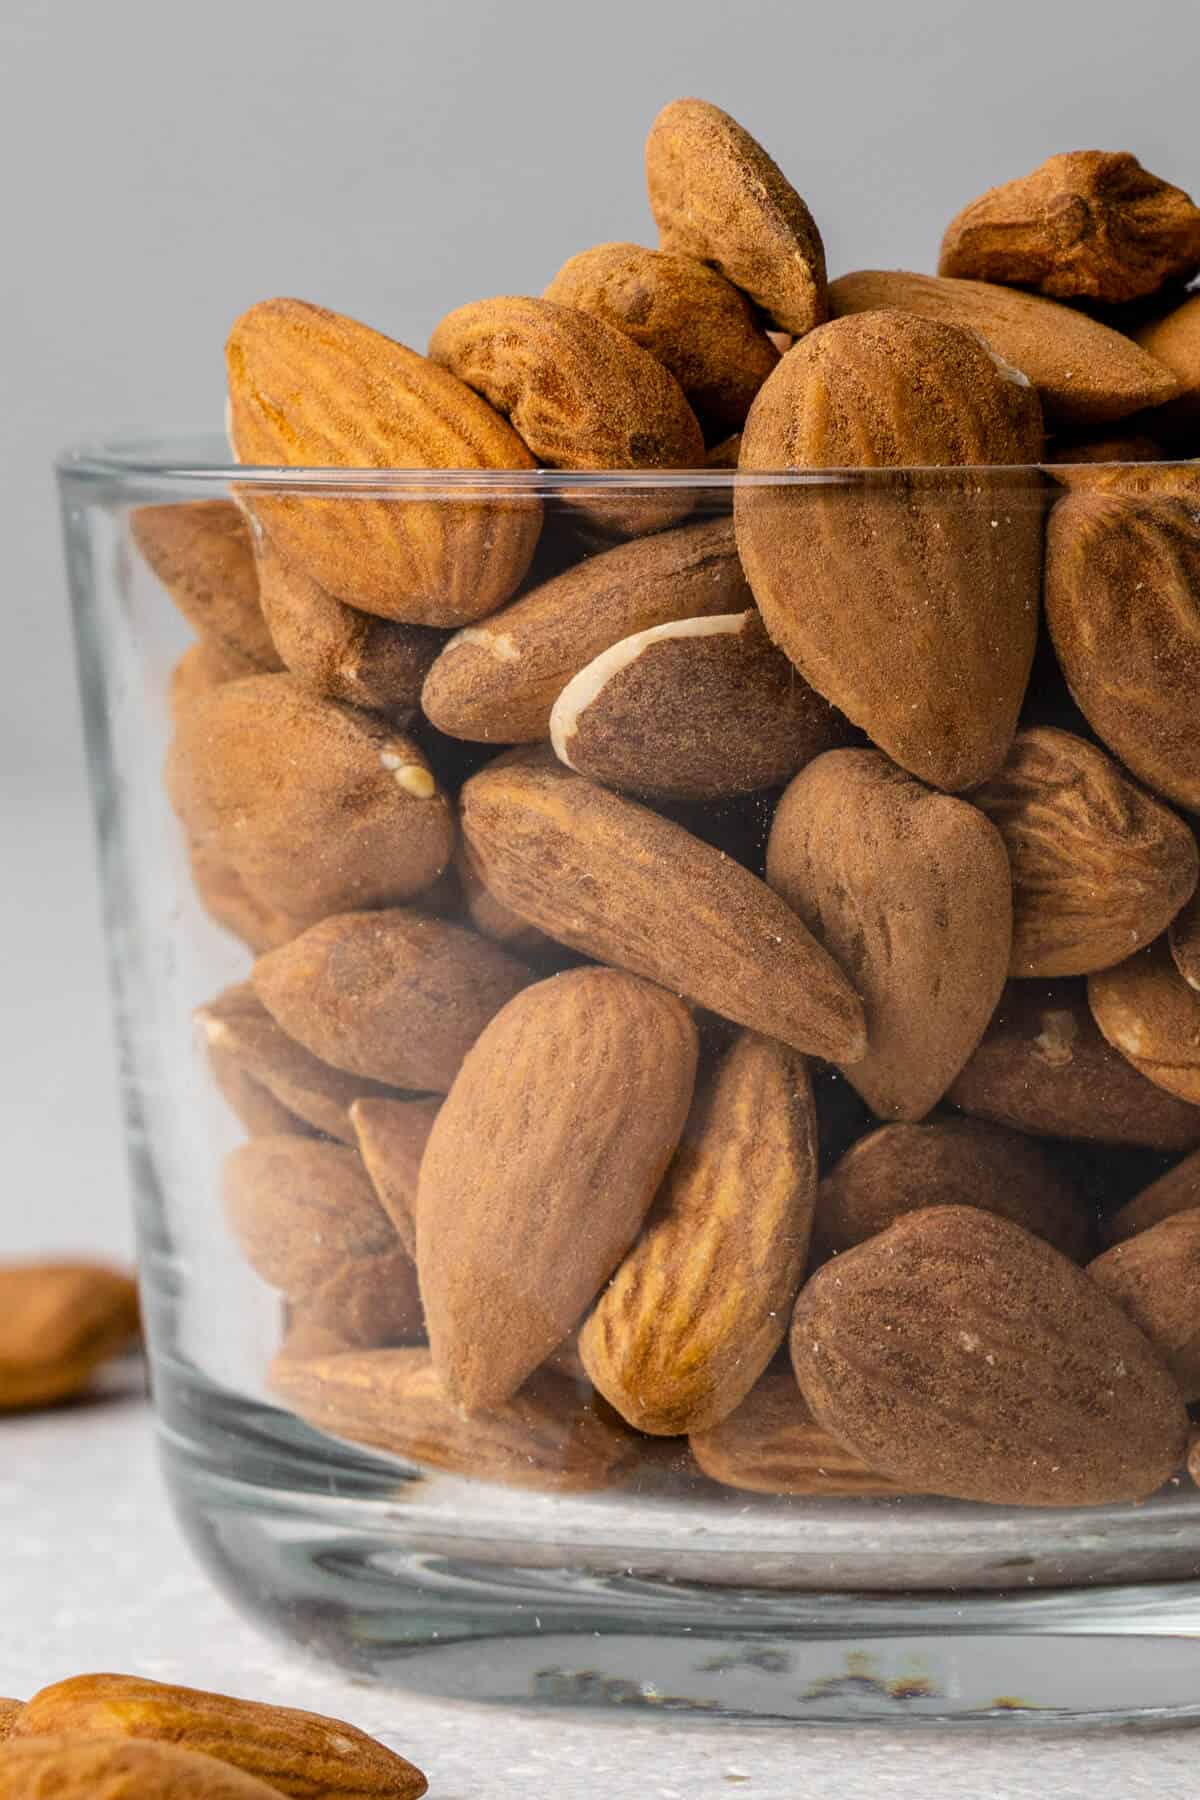 Raw almonds in a glass